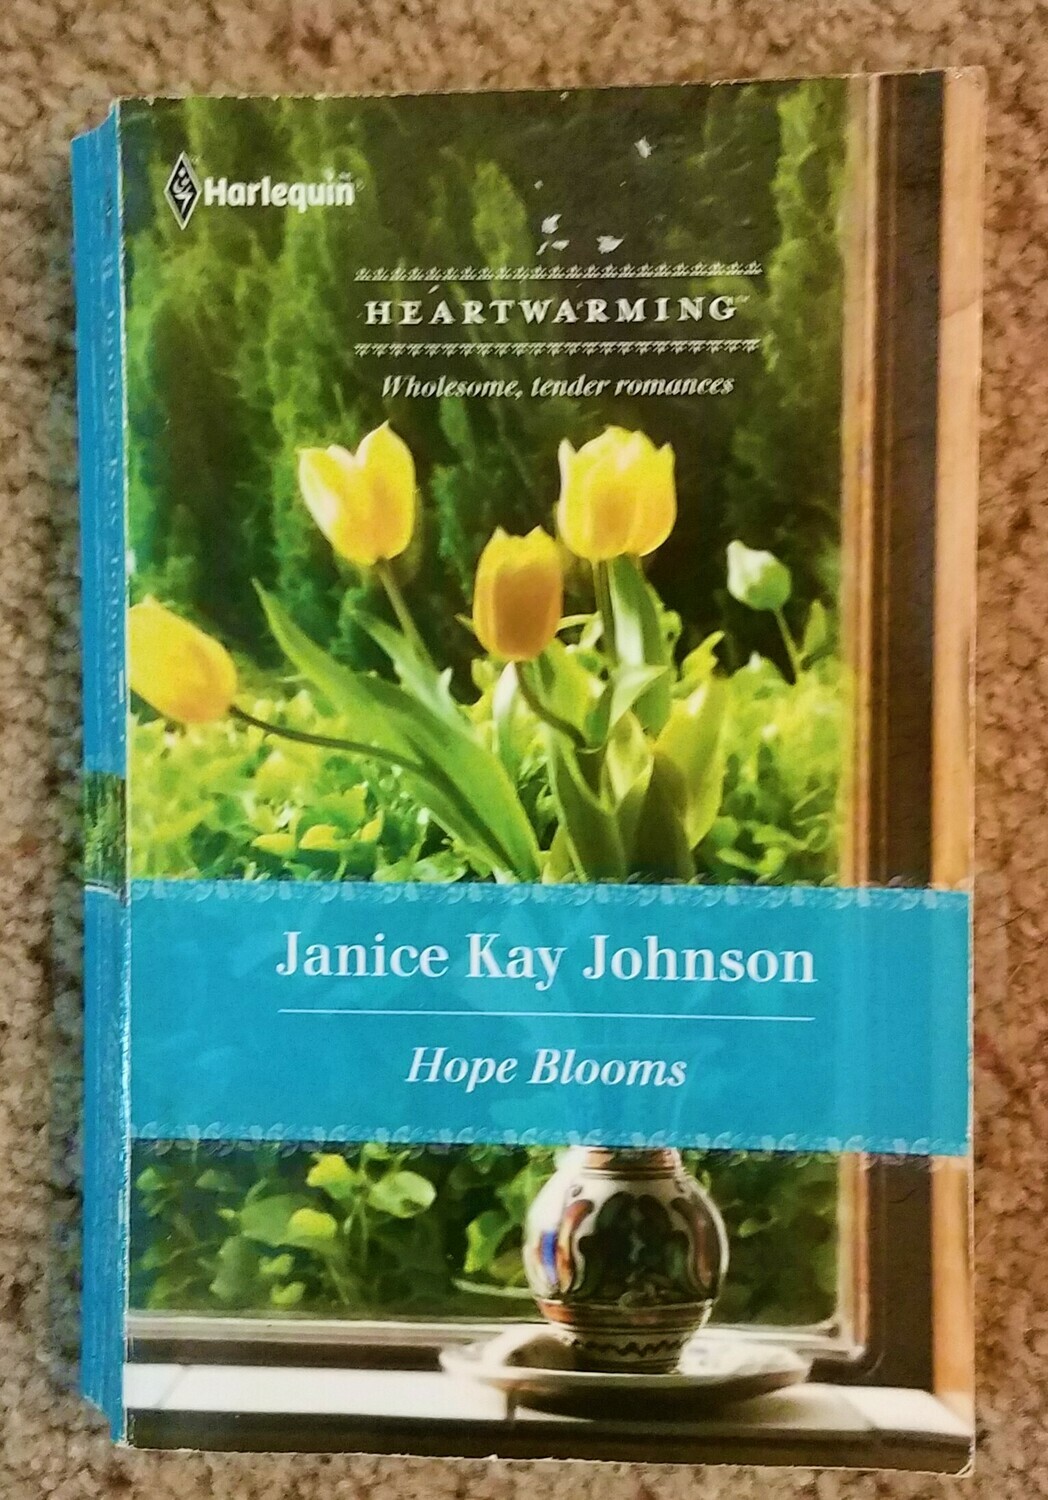 Hope Blooms by Janice Kay Johnson